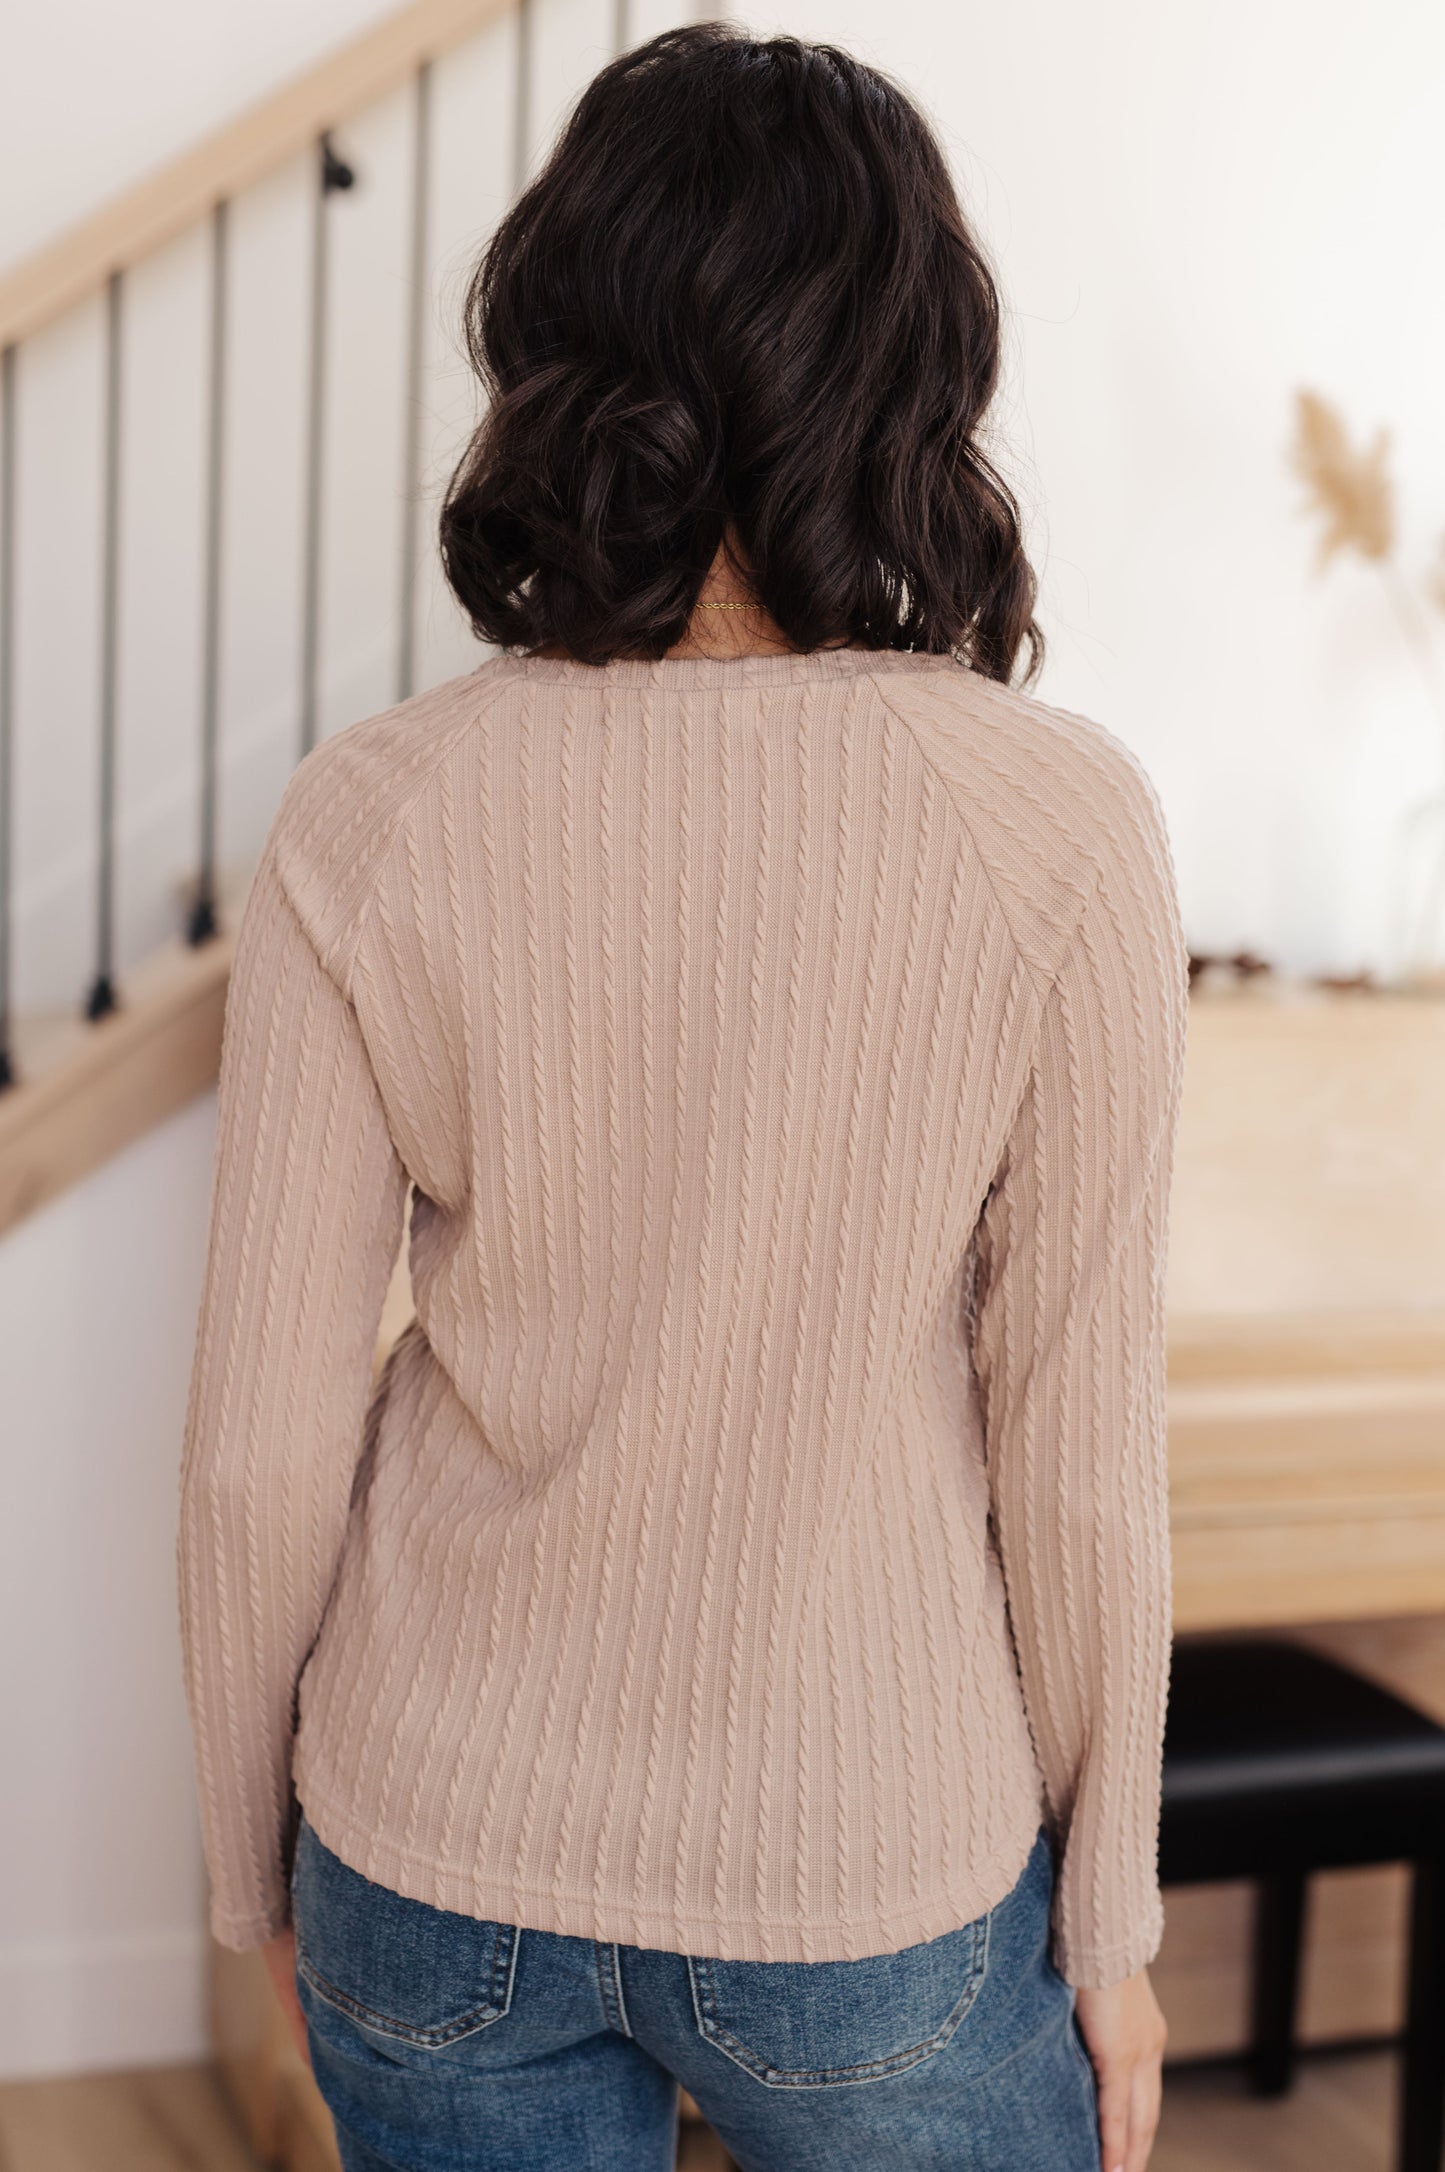 Soothe your senses in this Winding Down Cable Detail Top. A textured knit with raglan sleeves and round neckline will keep you feeling comfortable and stylish. Enjoy the luxurious softness of this timeless piece. S - 3X